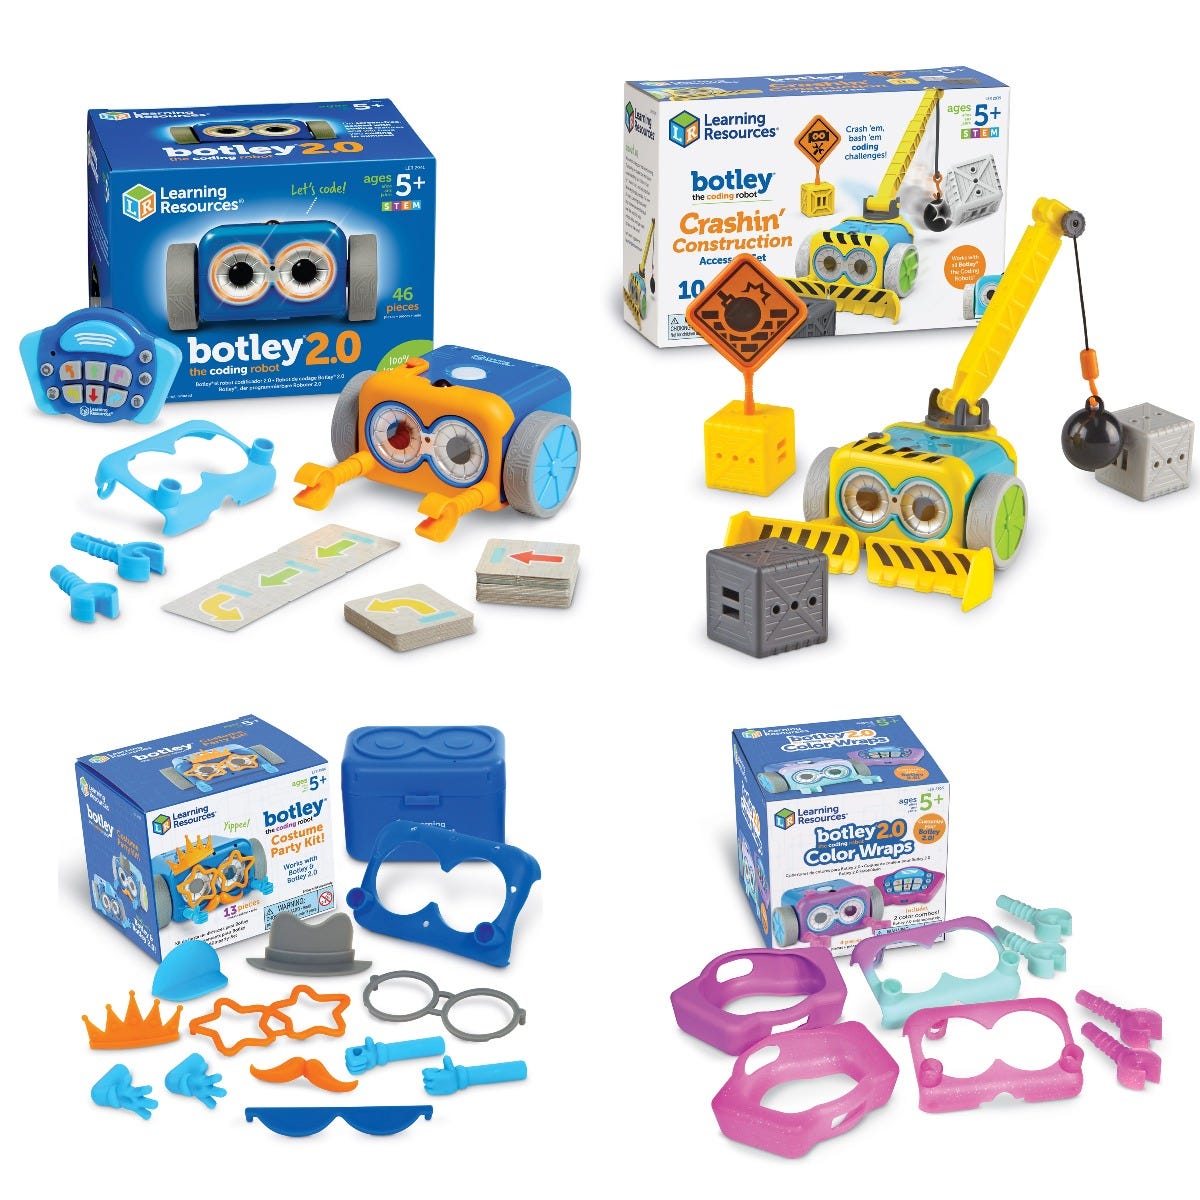 Learning Resources' Ultimate Botley 2.0 Coding Robot Bundle 